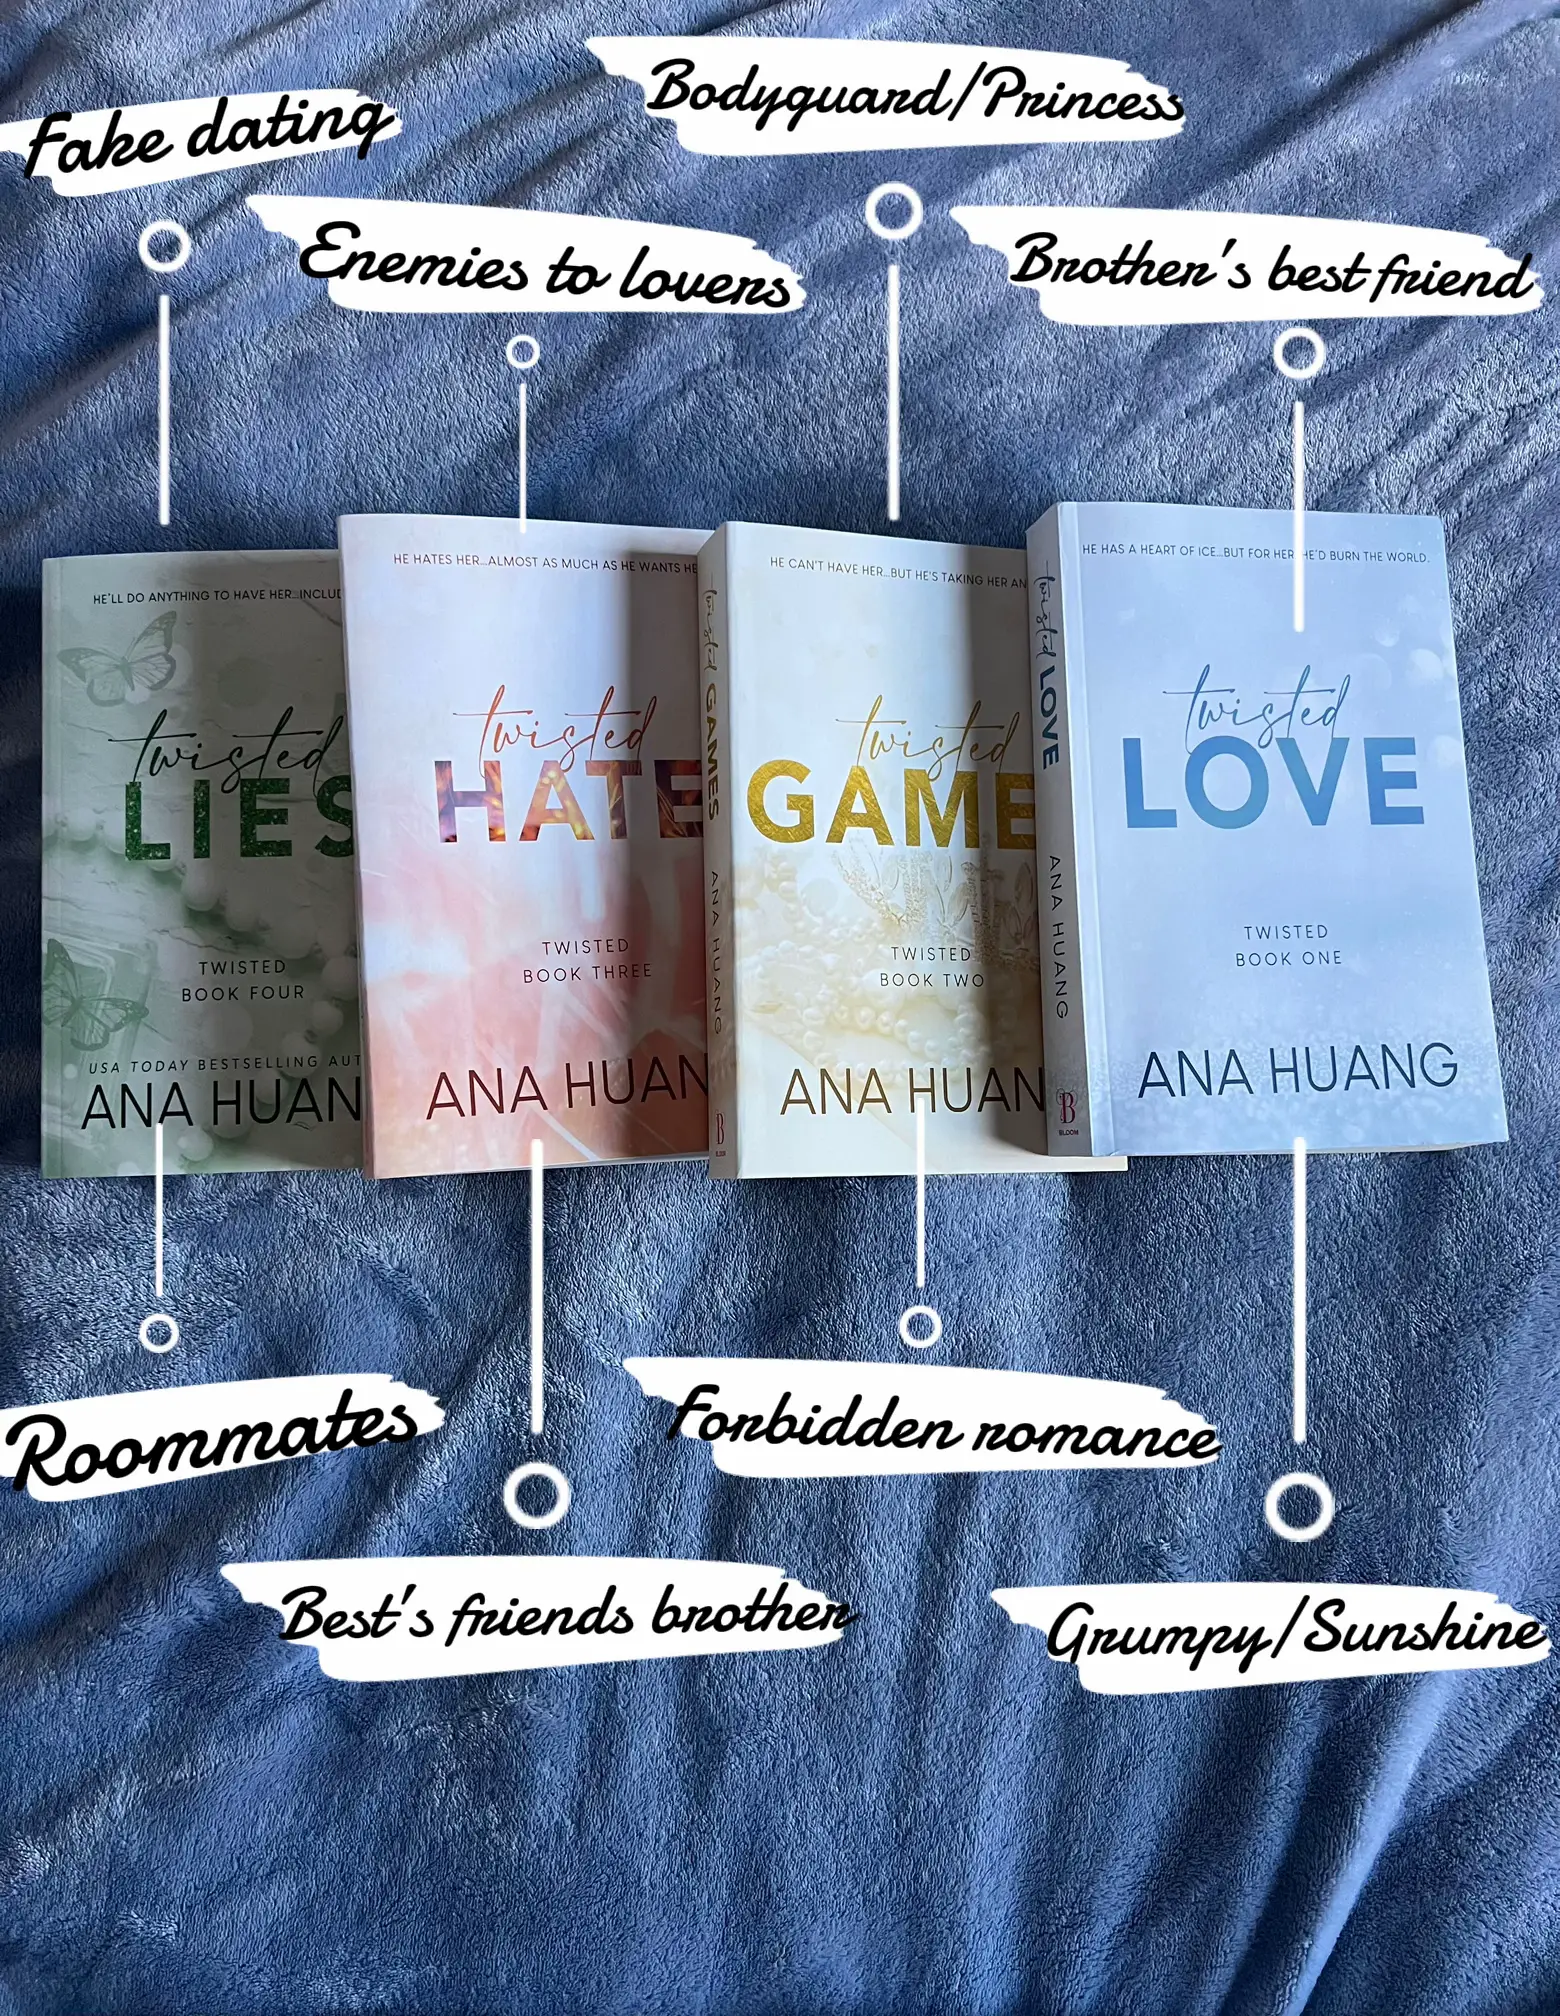 Twisted Series Bookmarks | Ana Huang | Romance book series book marks |  Stocking Stuffer | Readers Gift | Gift under 10